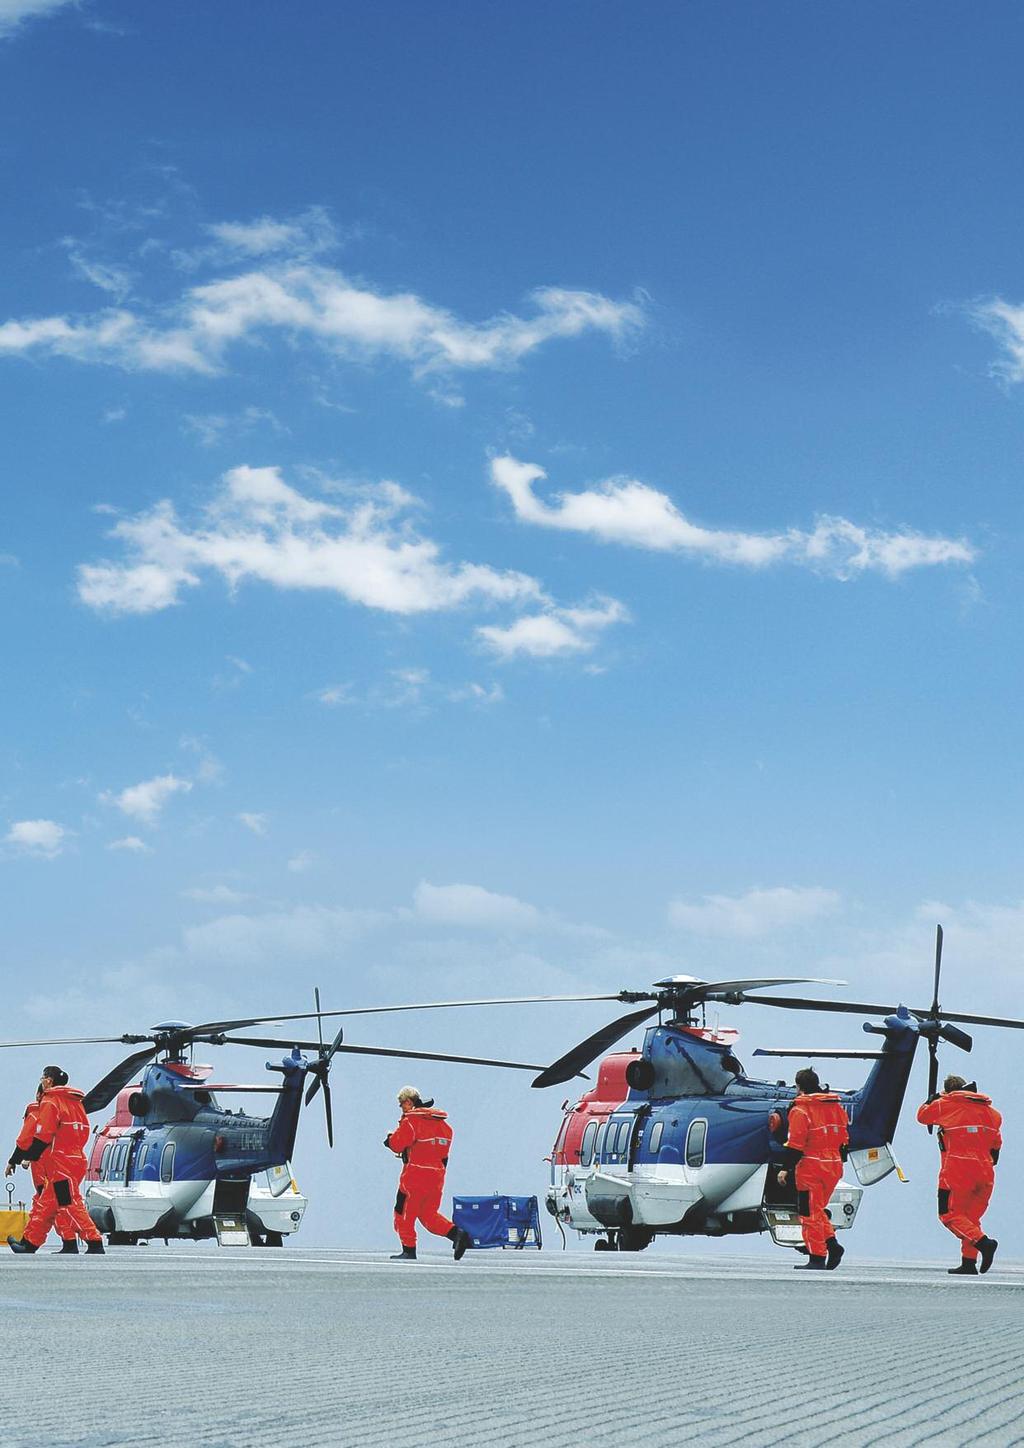 Oil & gas 003 THE VALUE OF EXPERIENCE A winning combination of high technology, simplicity and reliability makes Airbus Helicopters' rotorcraft particularly suited for offshore operations.